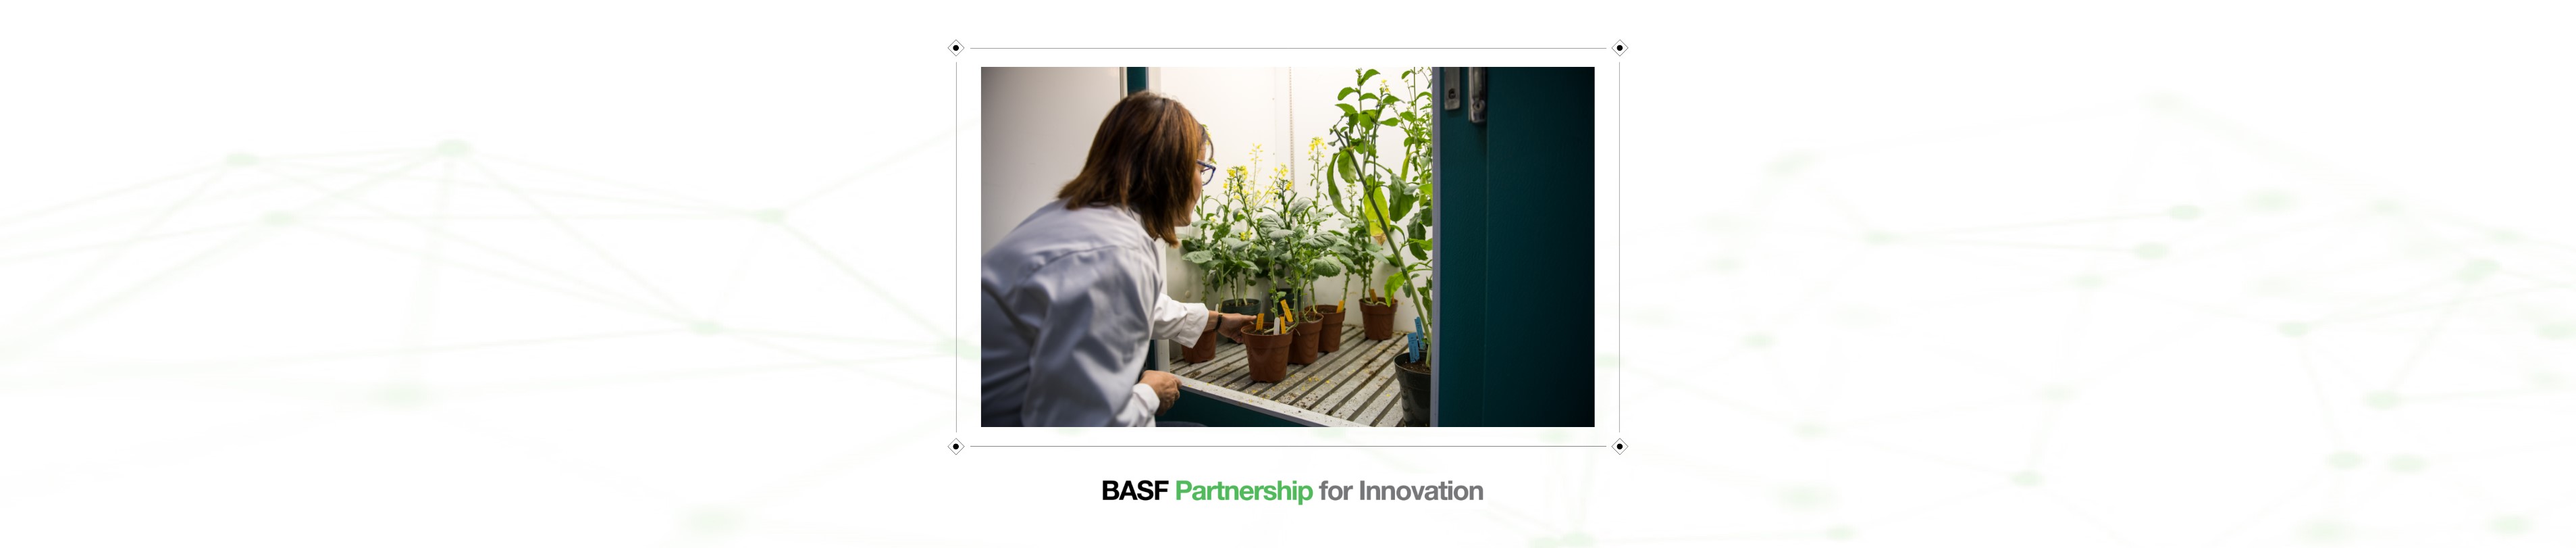 a woman in a lab examining potted plants